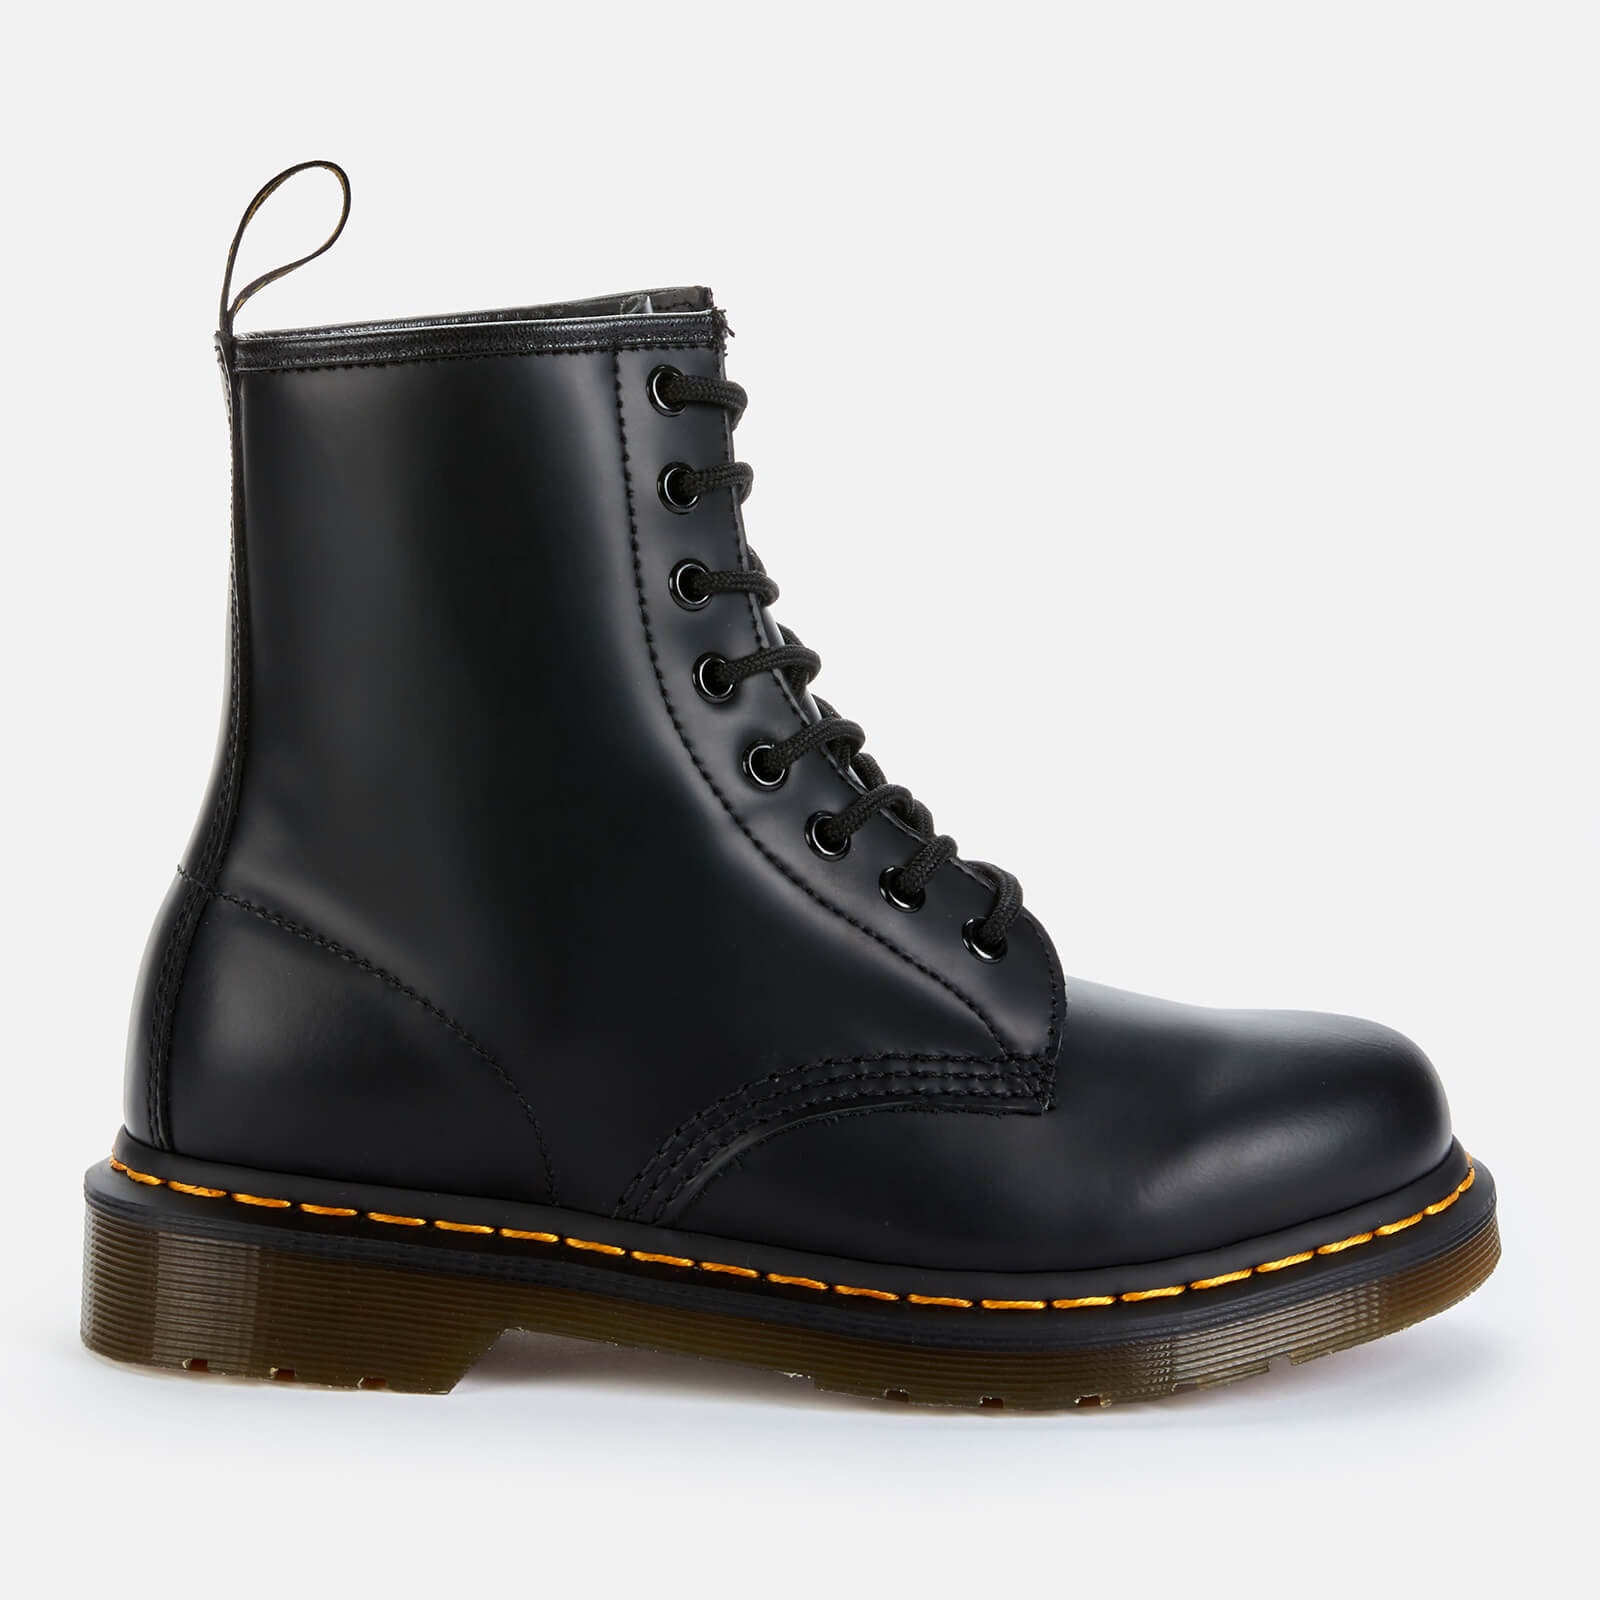 Dr. Martens 1460 Smooth Leather 8-Eye Boots - Black - 1